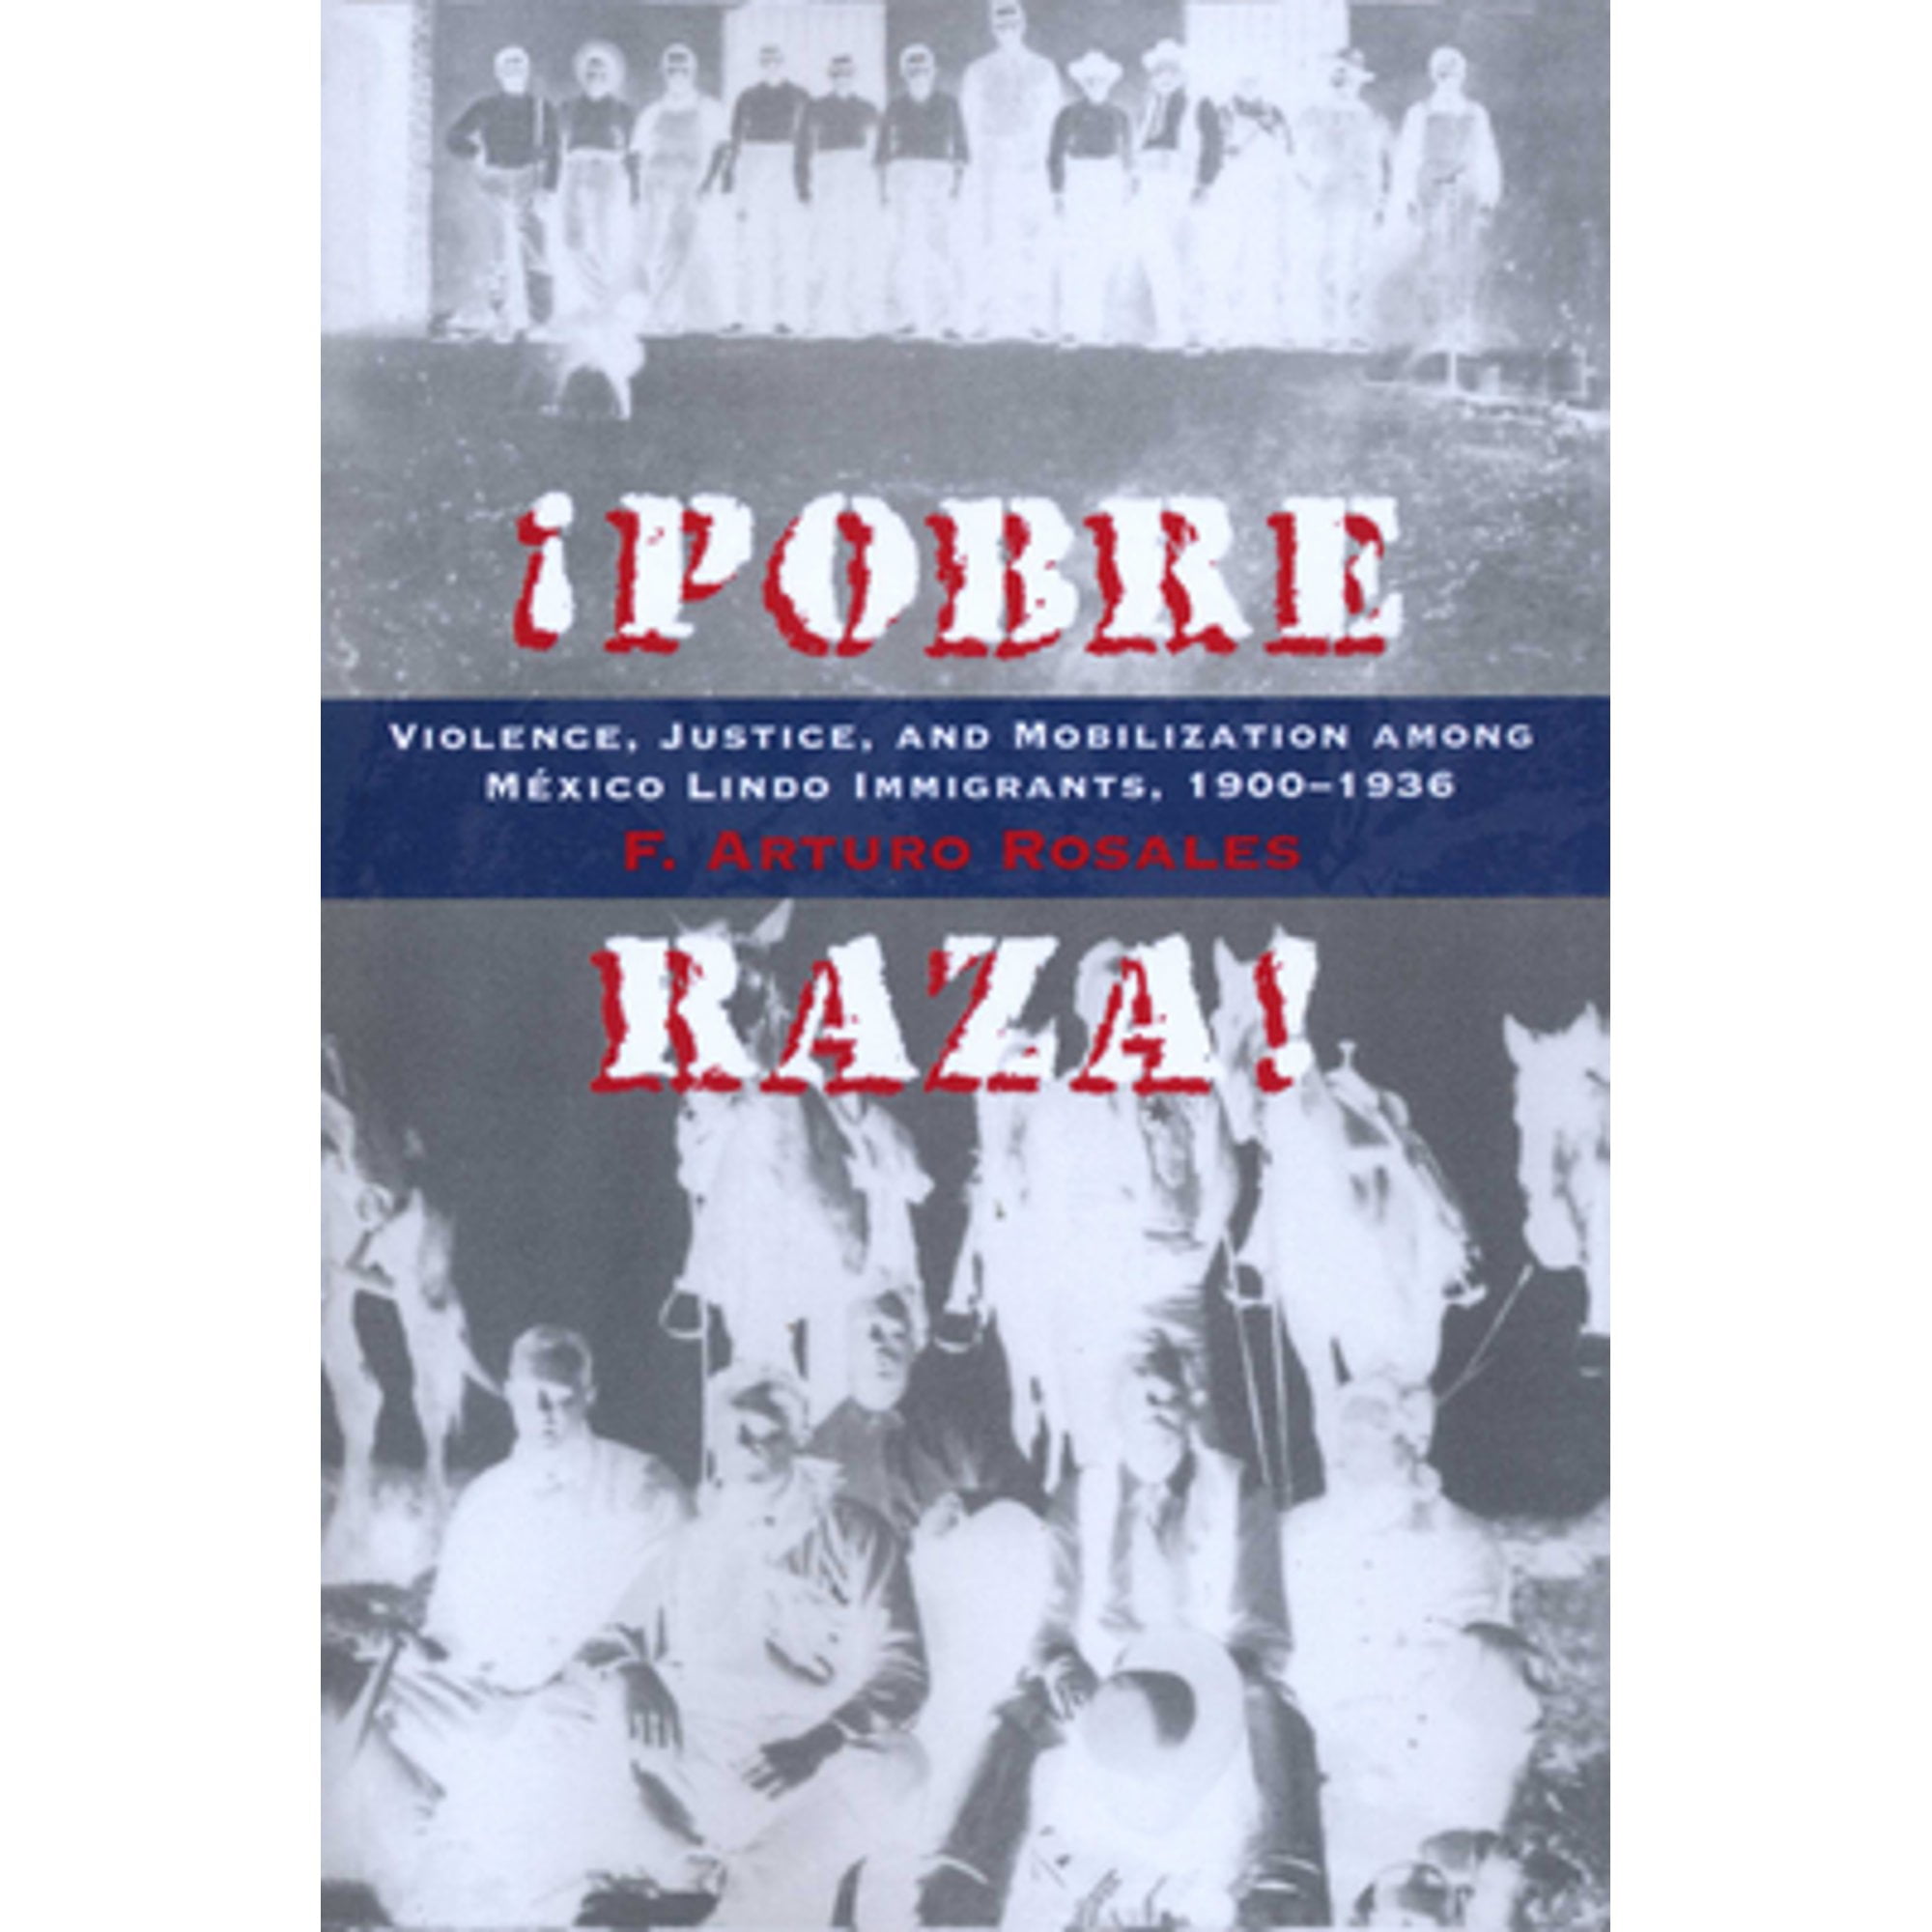 Pre-Owned Pobre Raza!: Violence, Justice, and Mobilization among México Lindo Immigrants, 1900-1936 (Paperback) by F Arturo Rosales